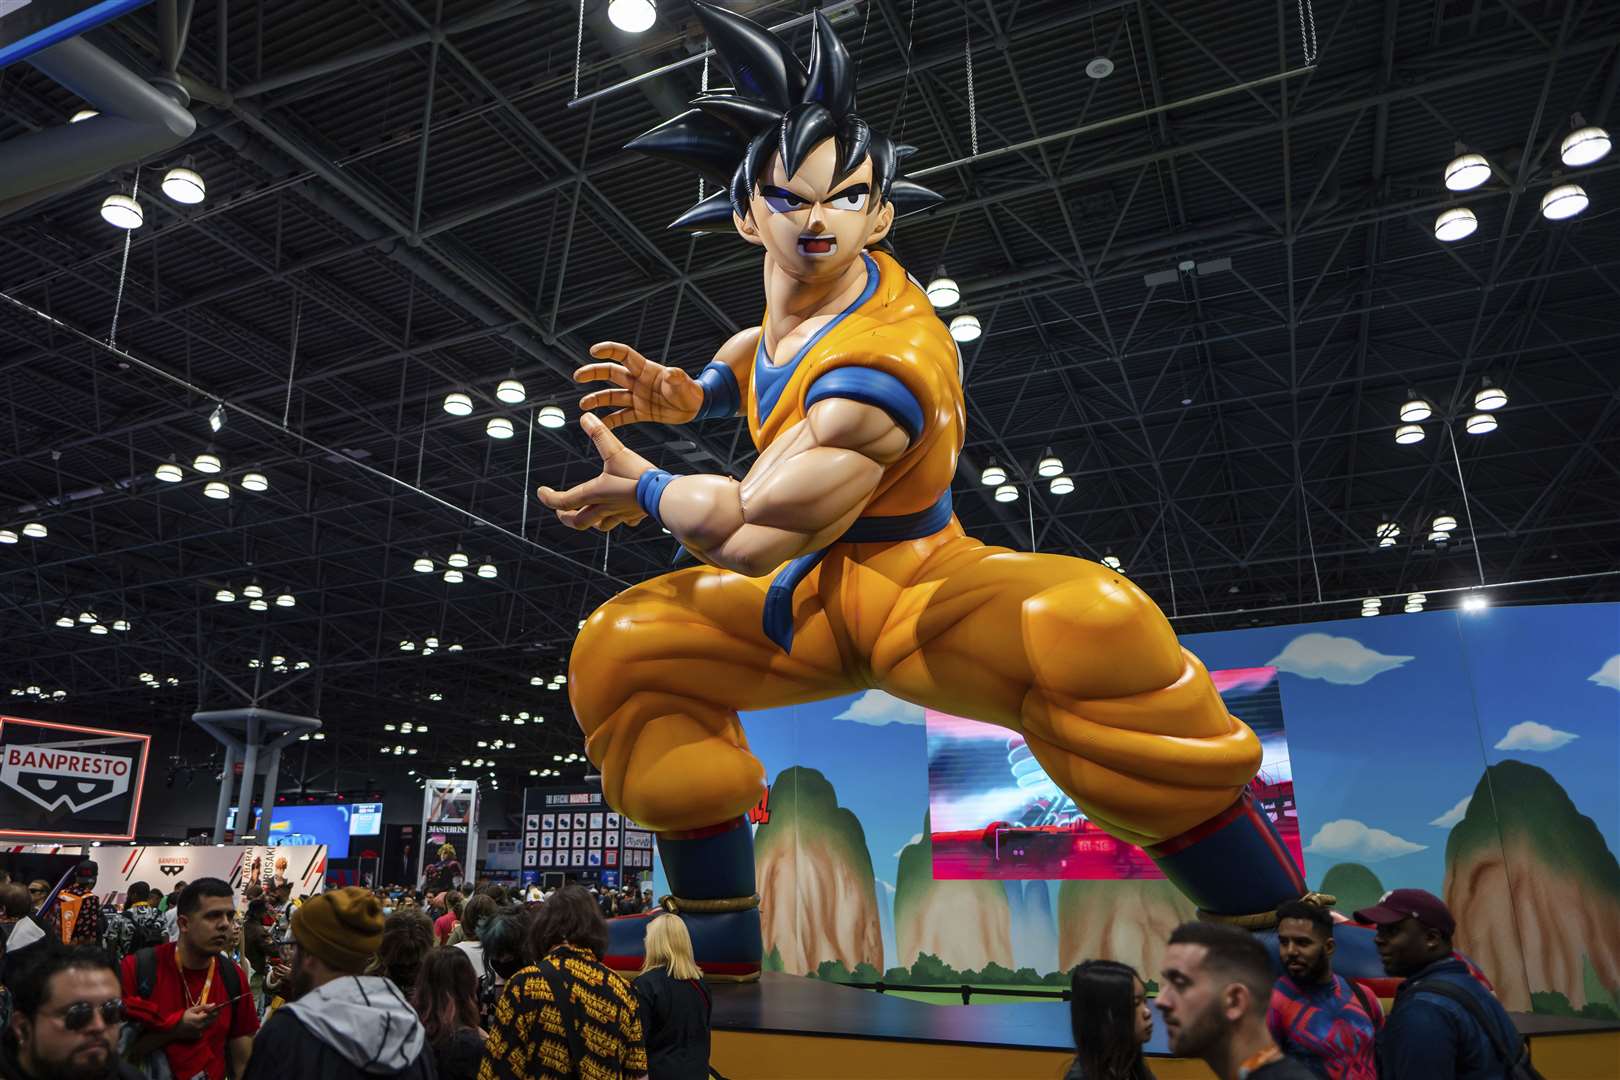 Dragon Ball Z booth at New York Comic Con (Charles Sykes/Invision/AP)